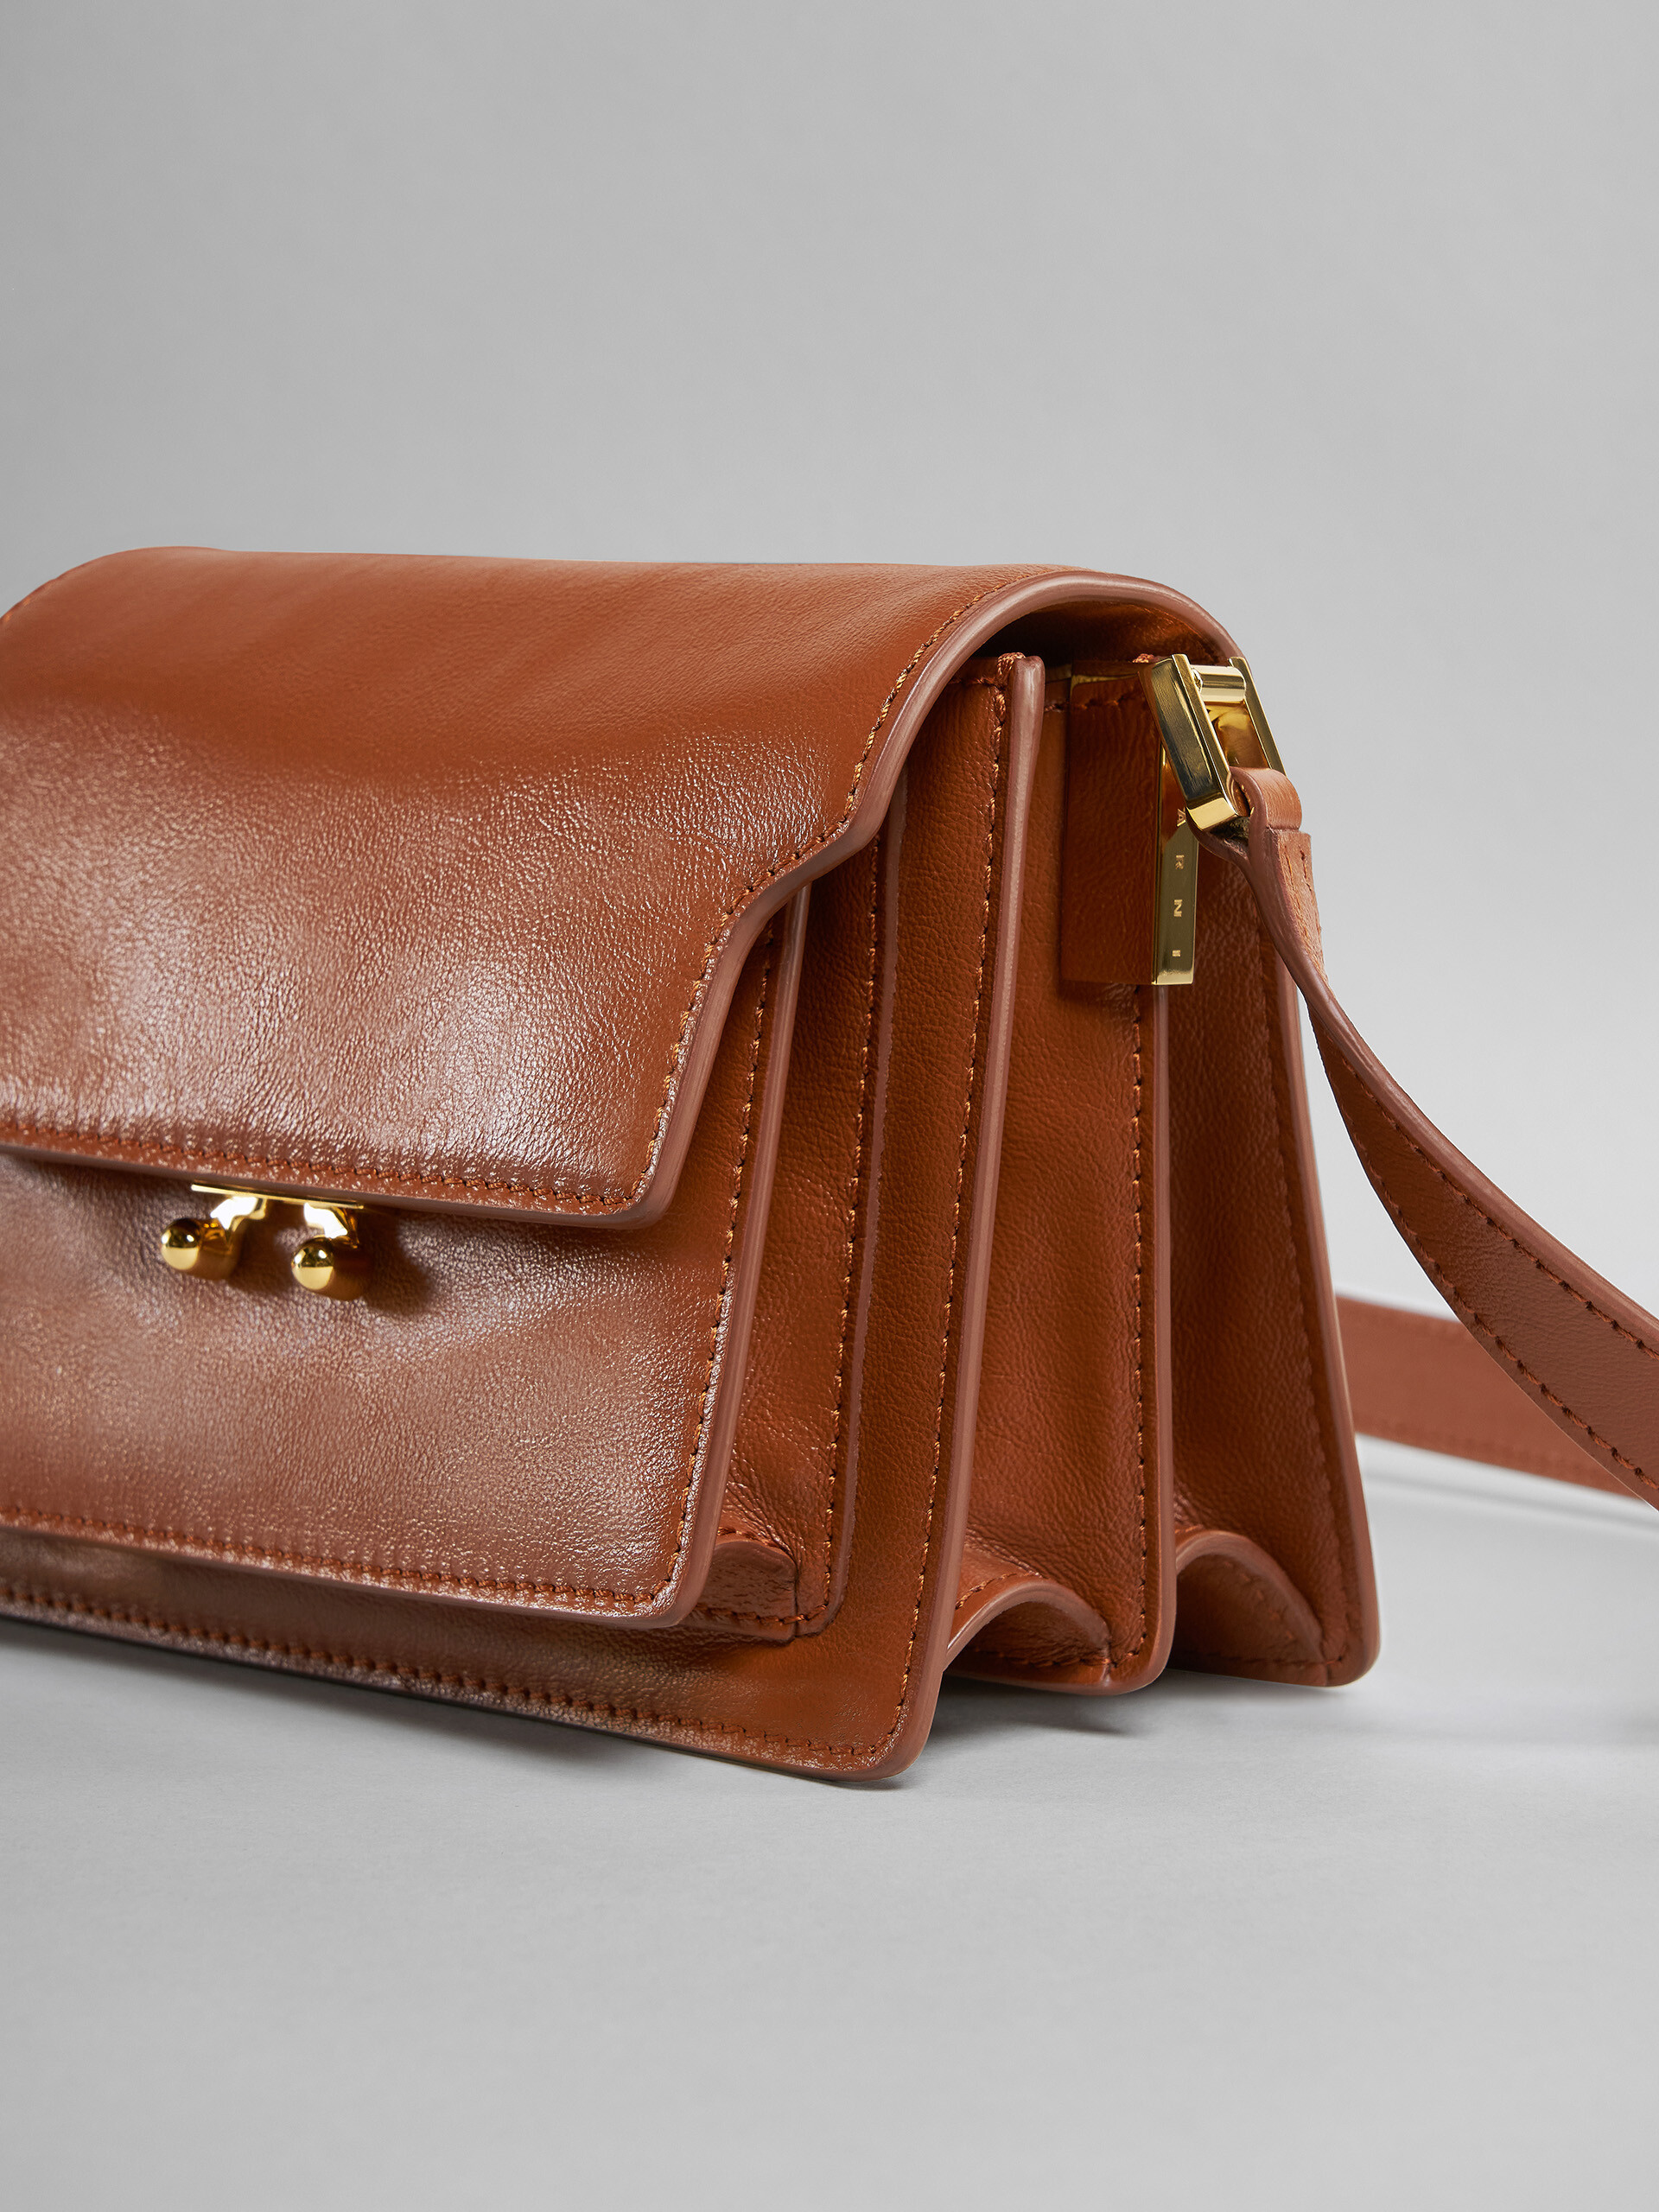 TRUNK SOFT mini bag in brown leather